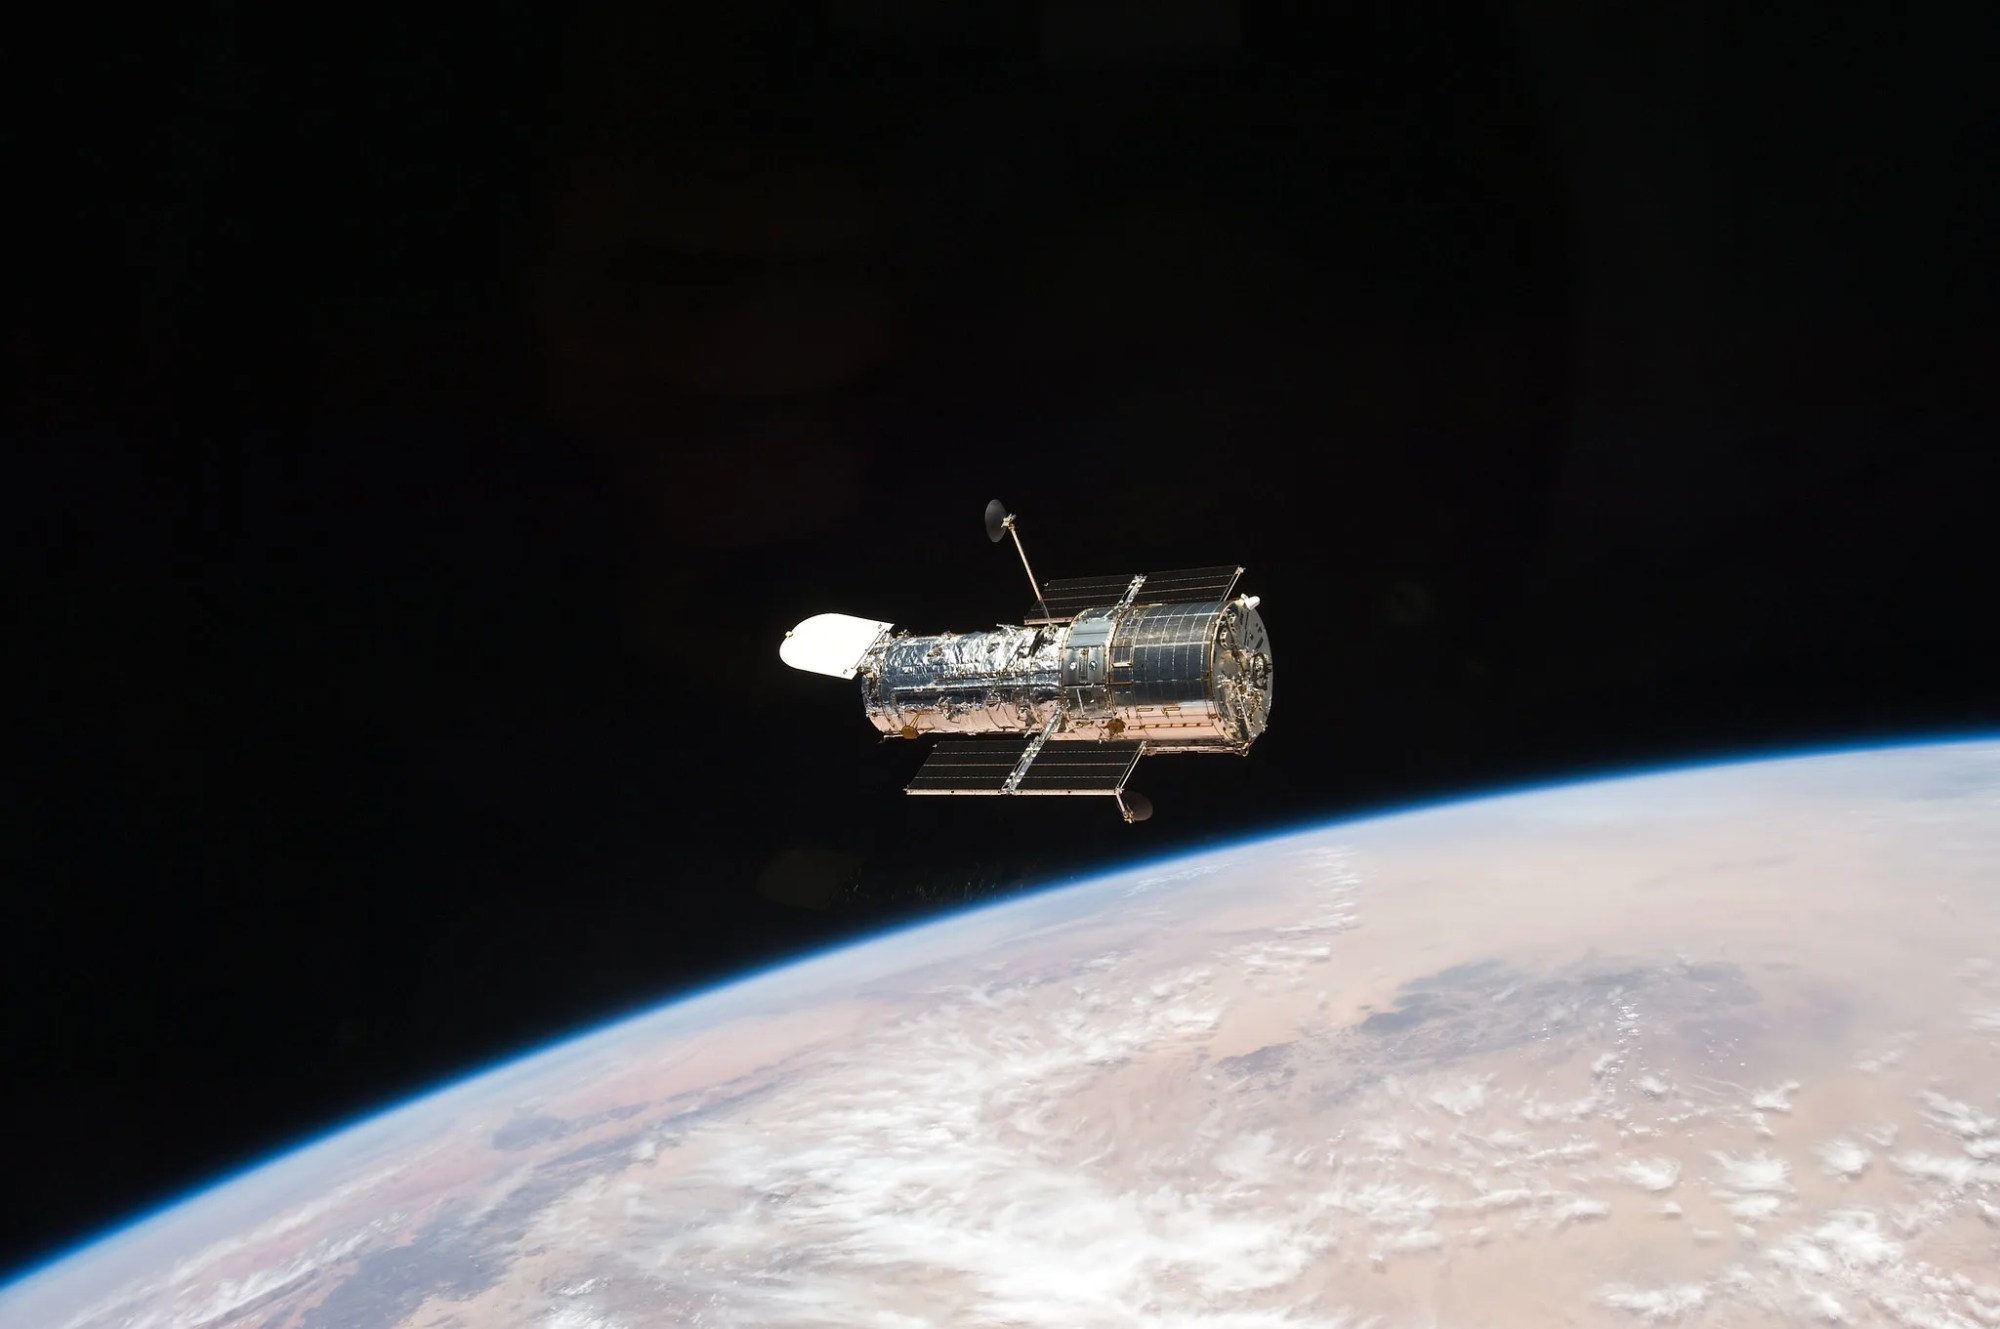 Hubble space telescope floating in space.